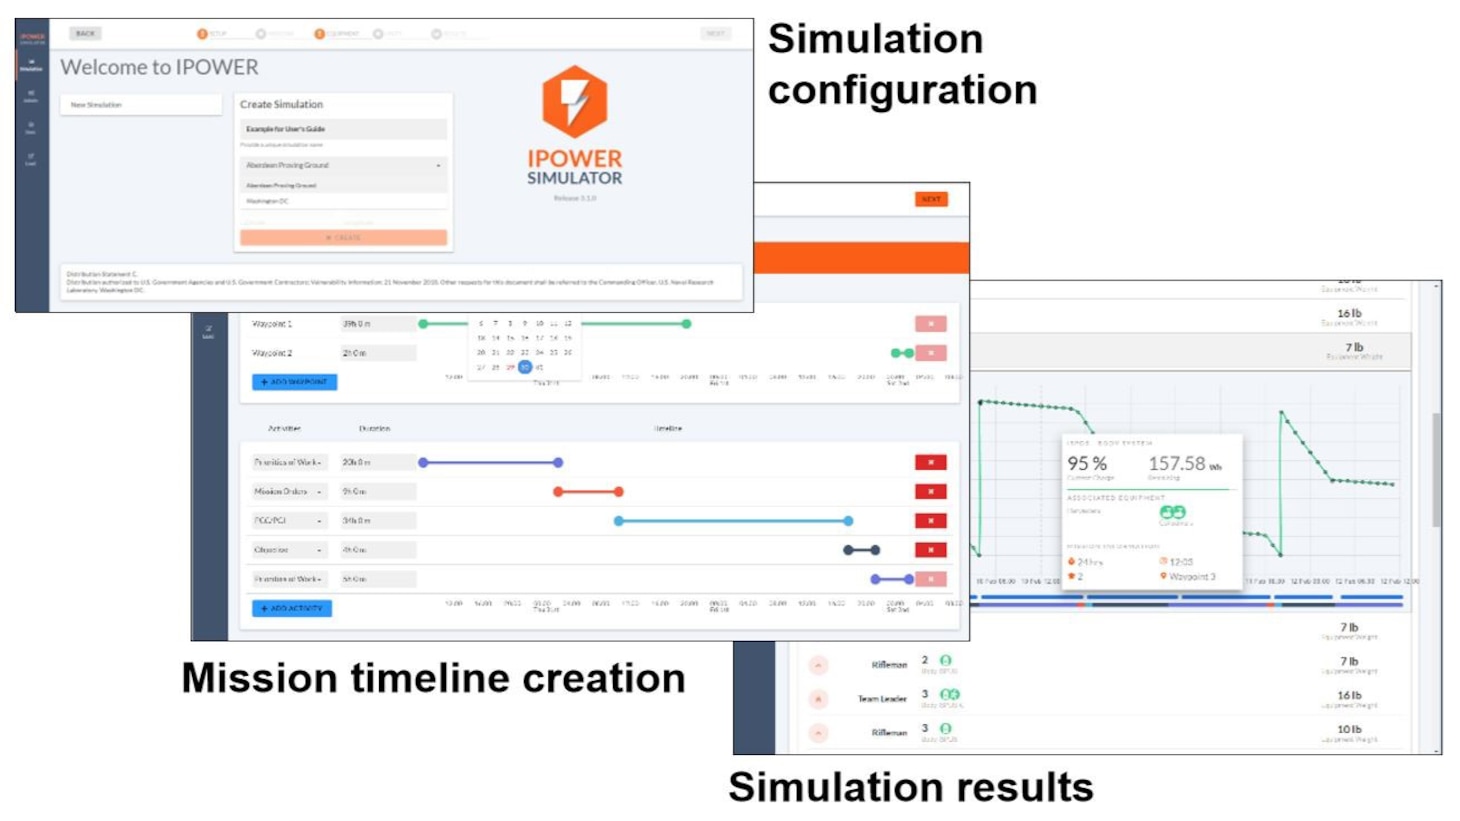 IPOWER gives users a flexible tool for simulating a wide variety of missions.